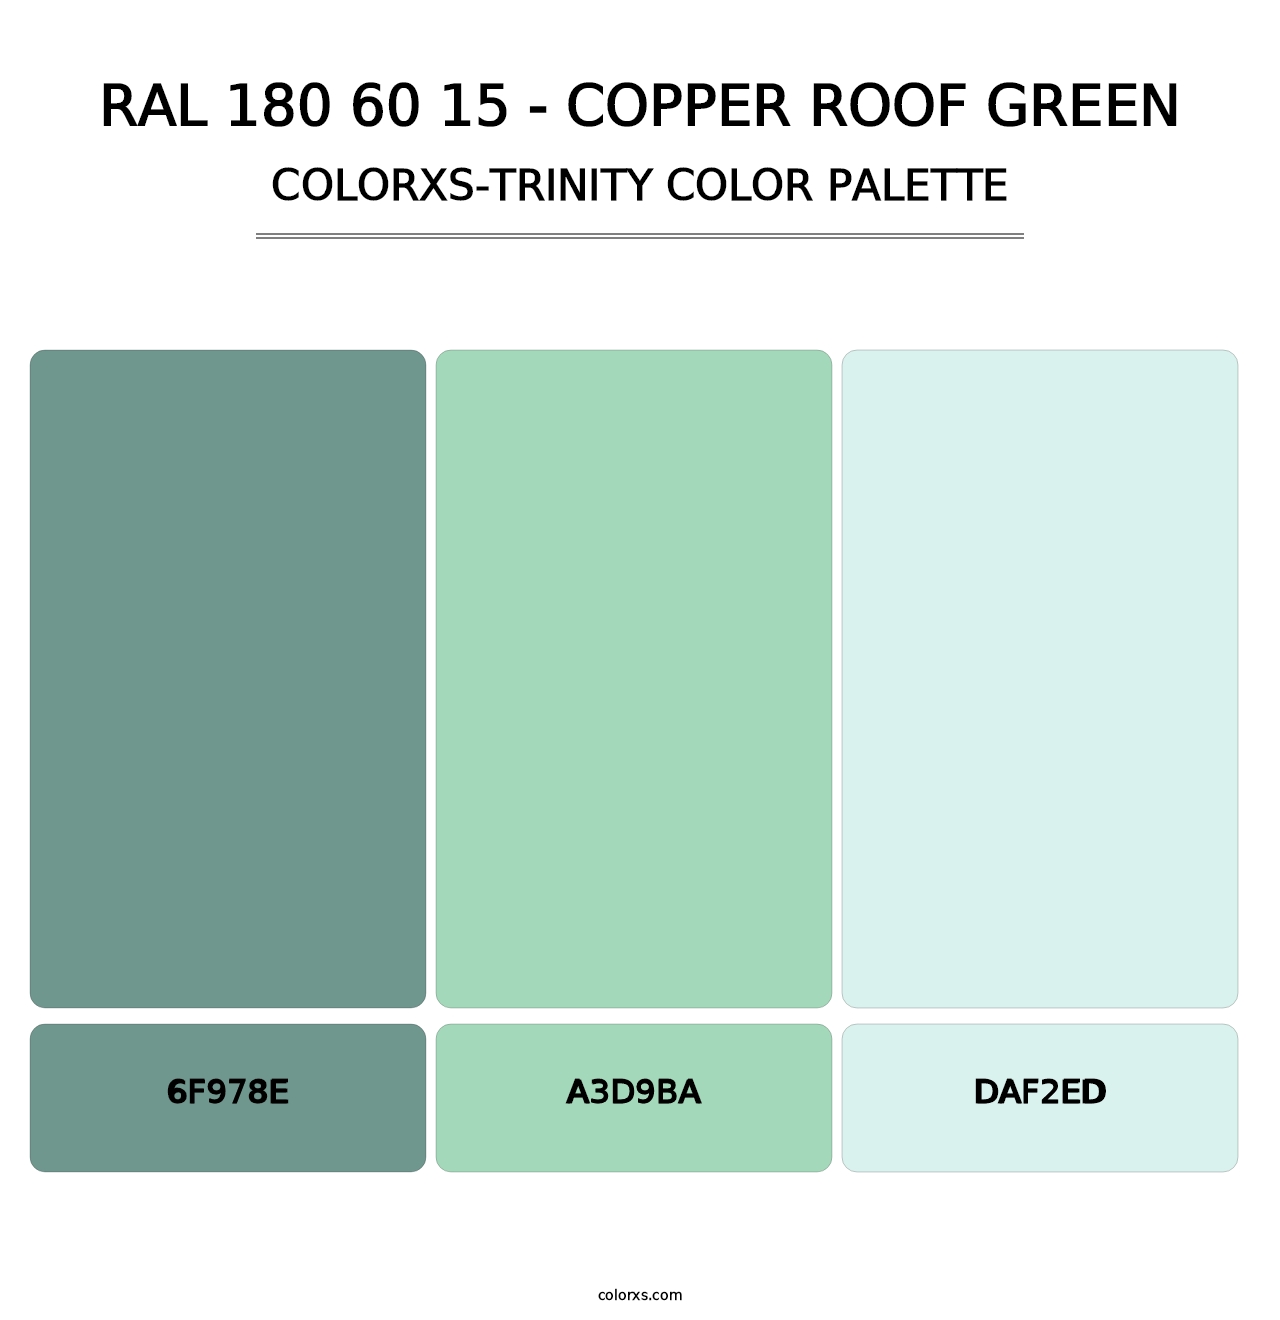 RAL 180 60 15 - Copper Roof Green - Colorxs Trinity Palette